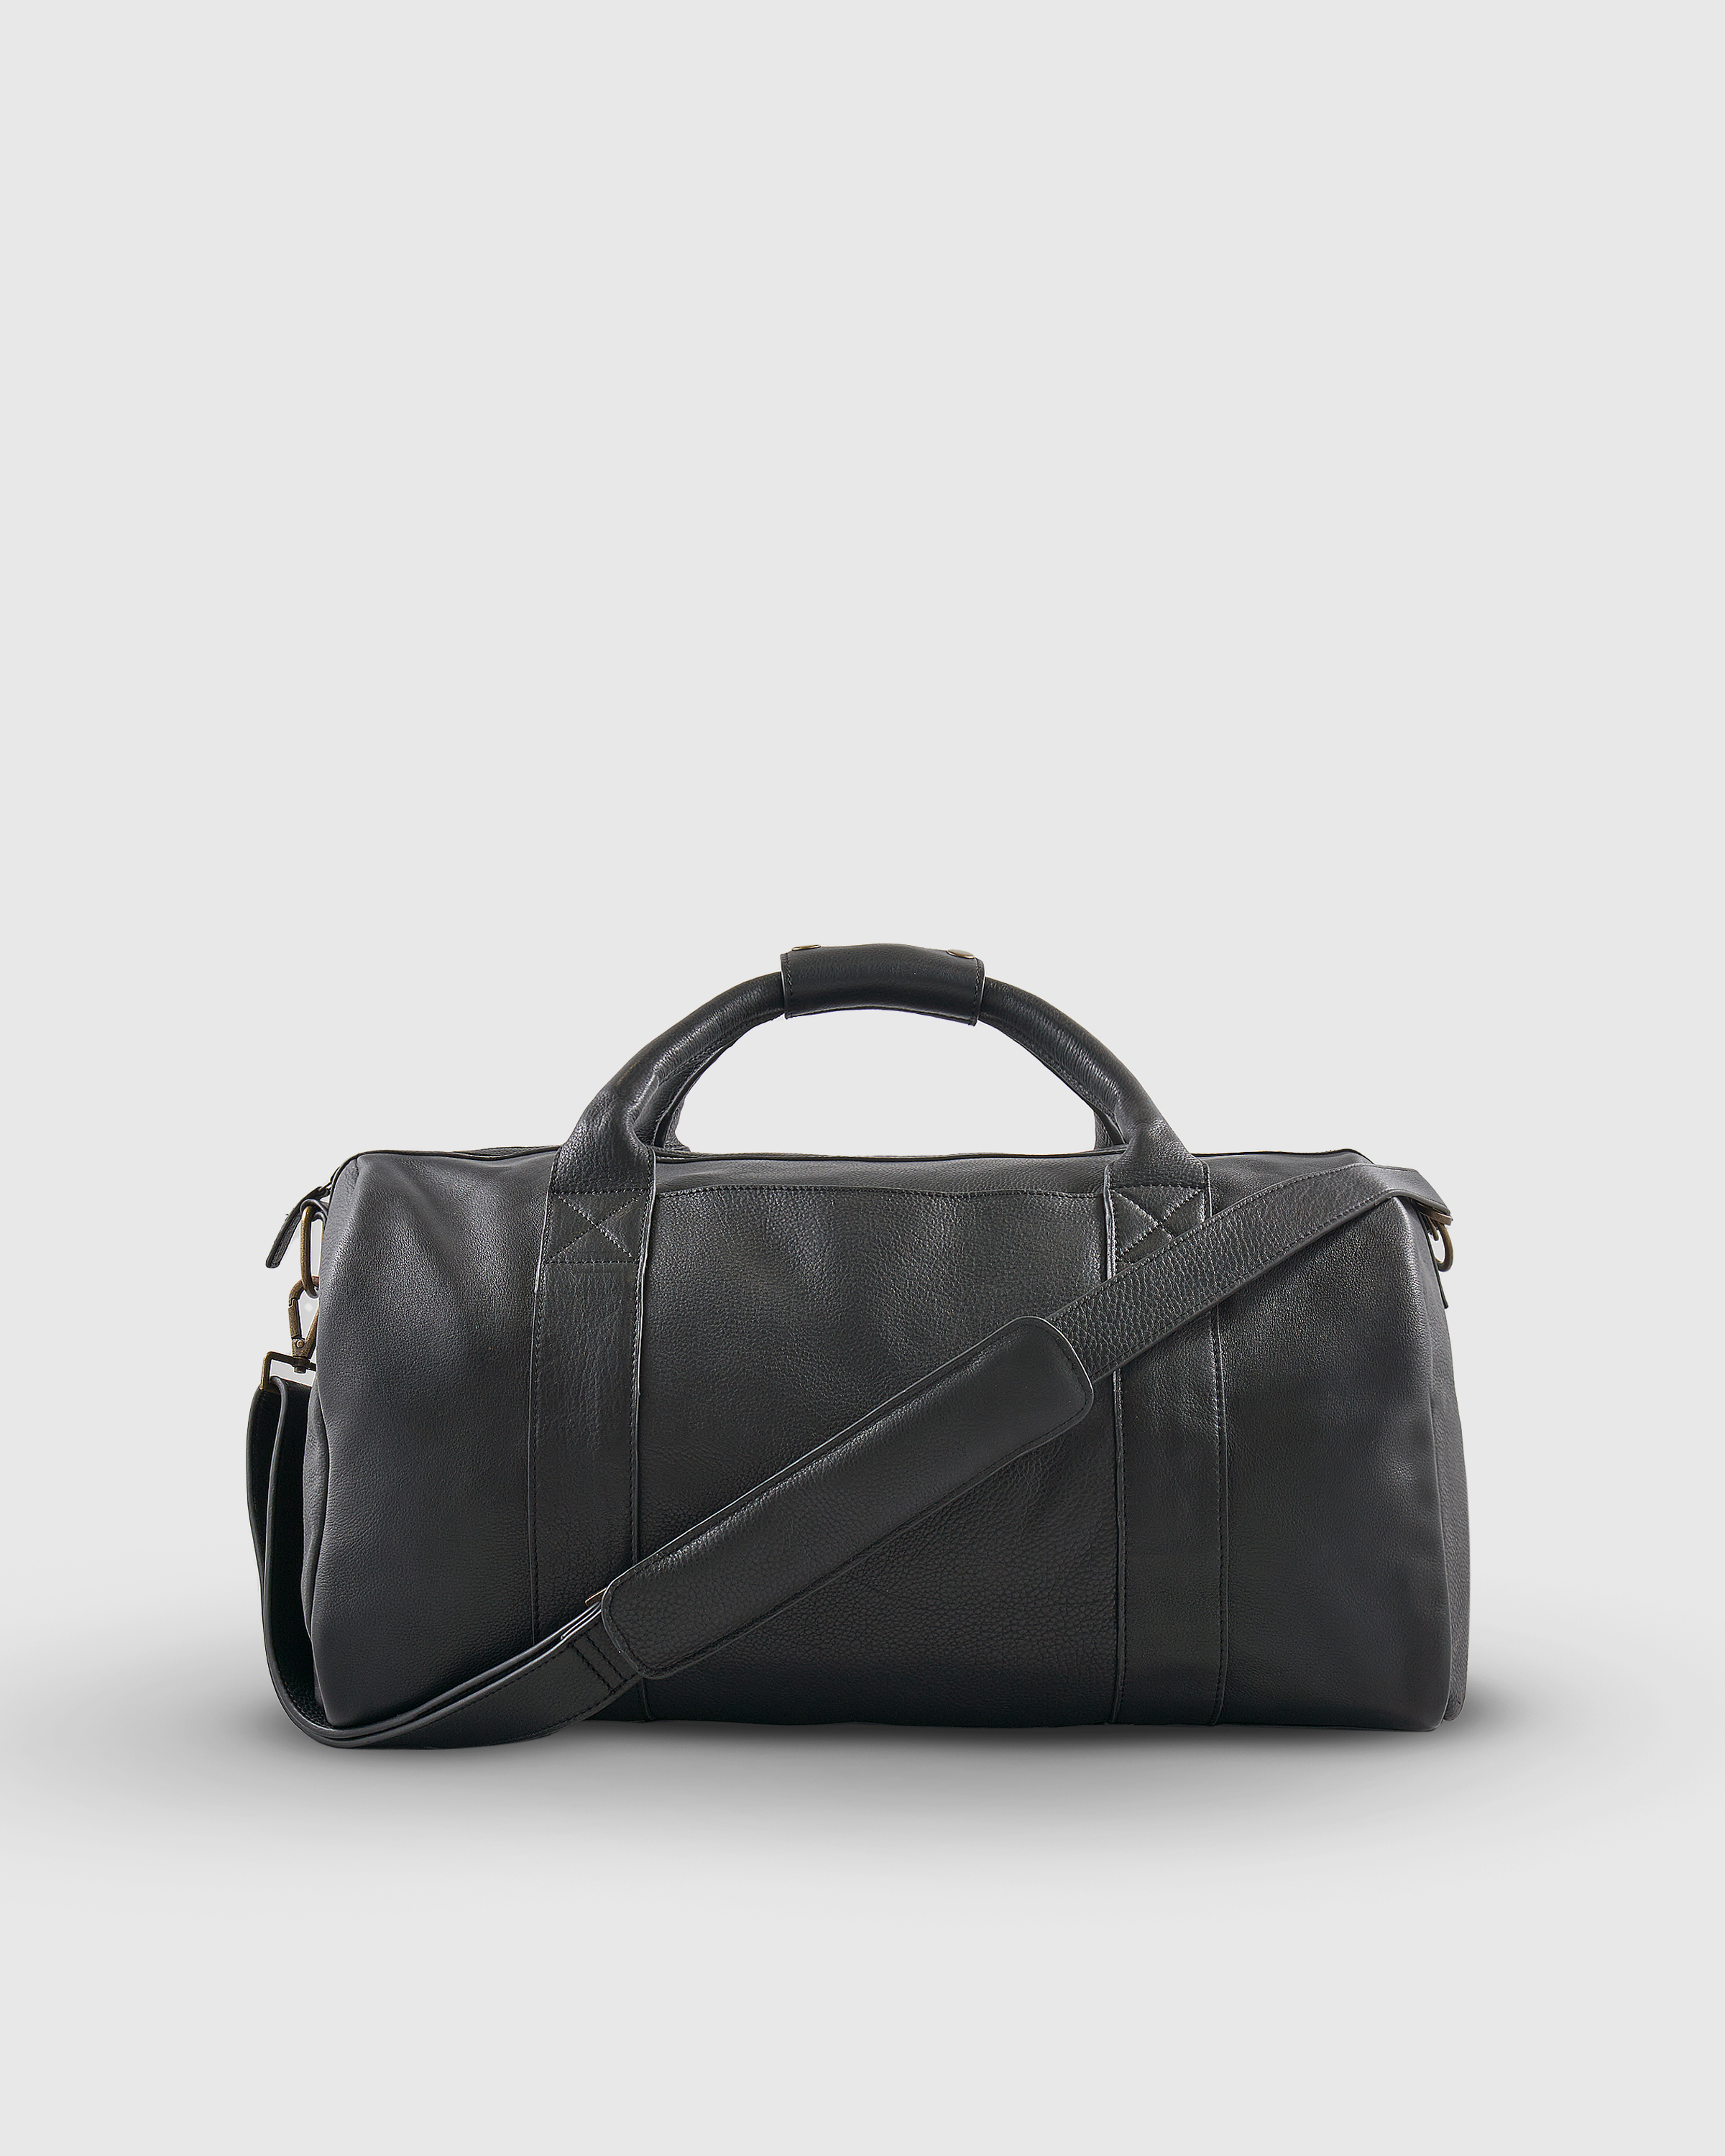 Quince Men's Nappa Leather Duffle Bag In Black